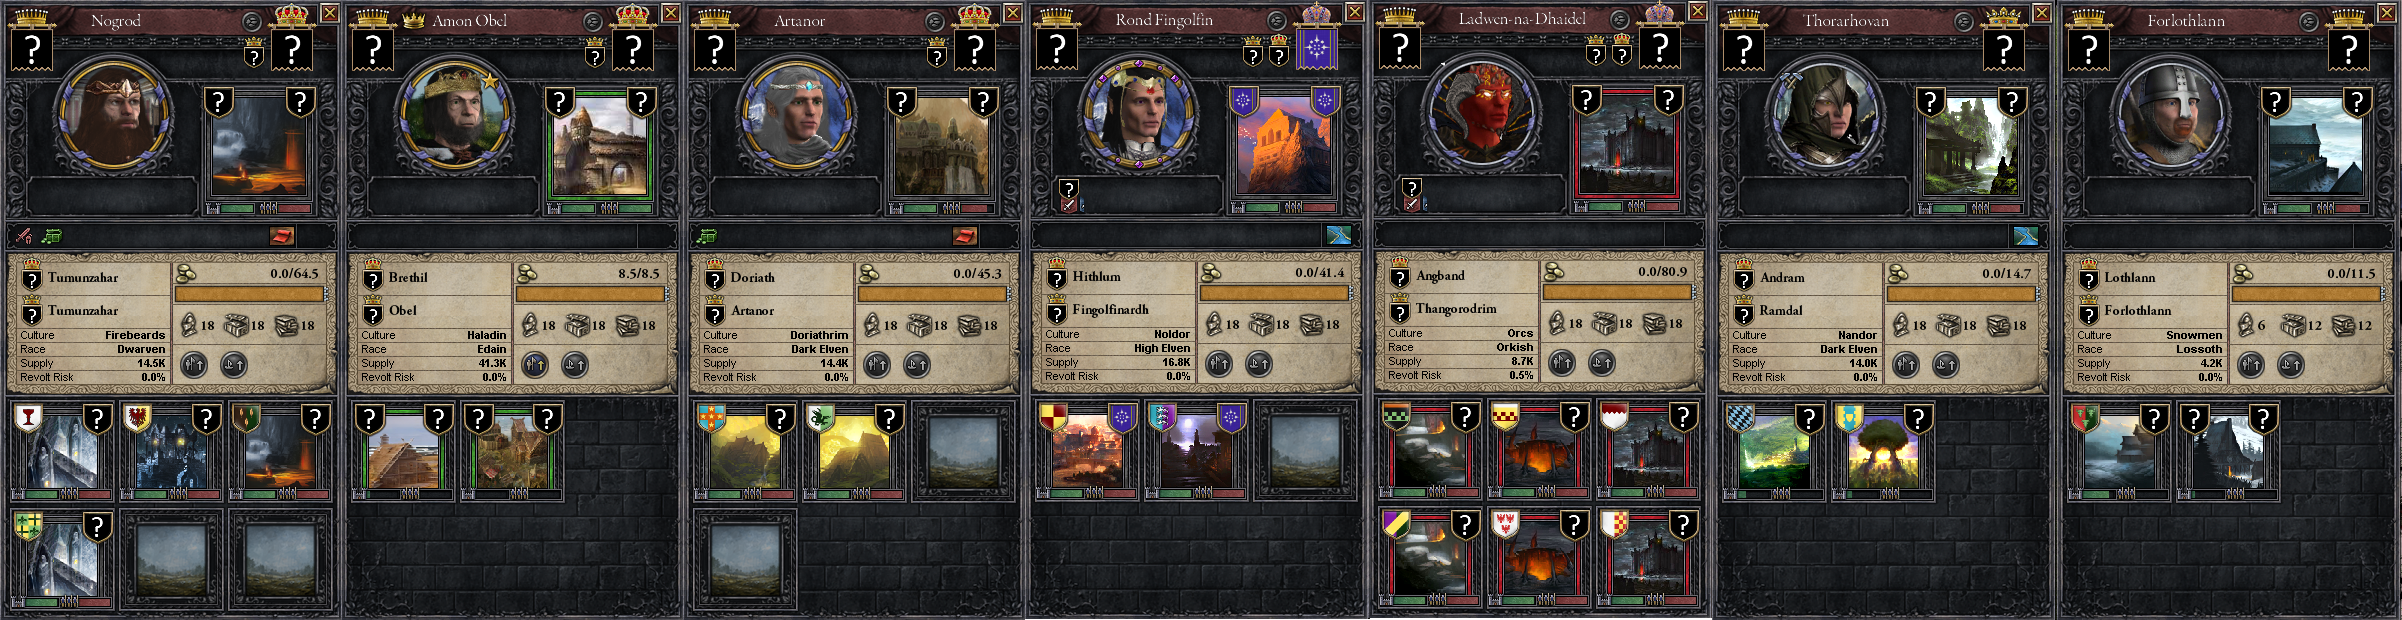 crusader kings 2 middle earth project